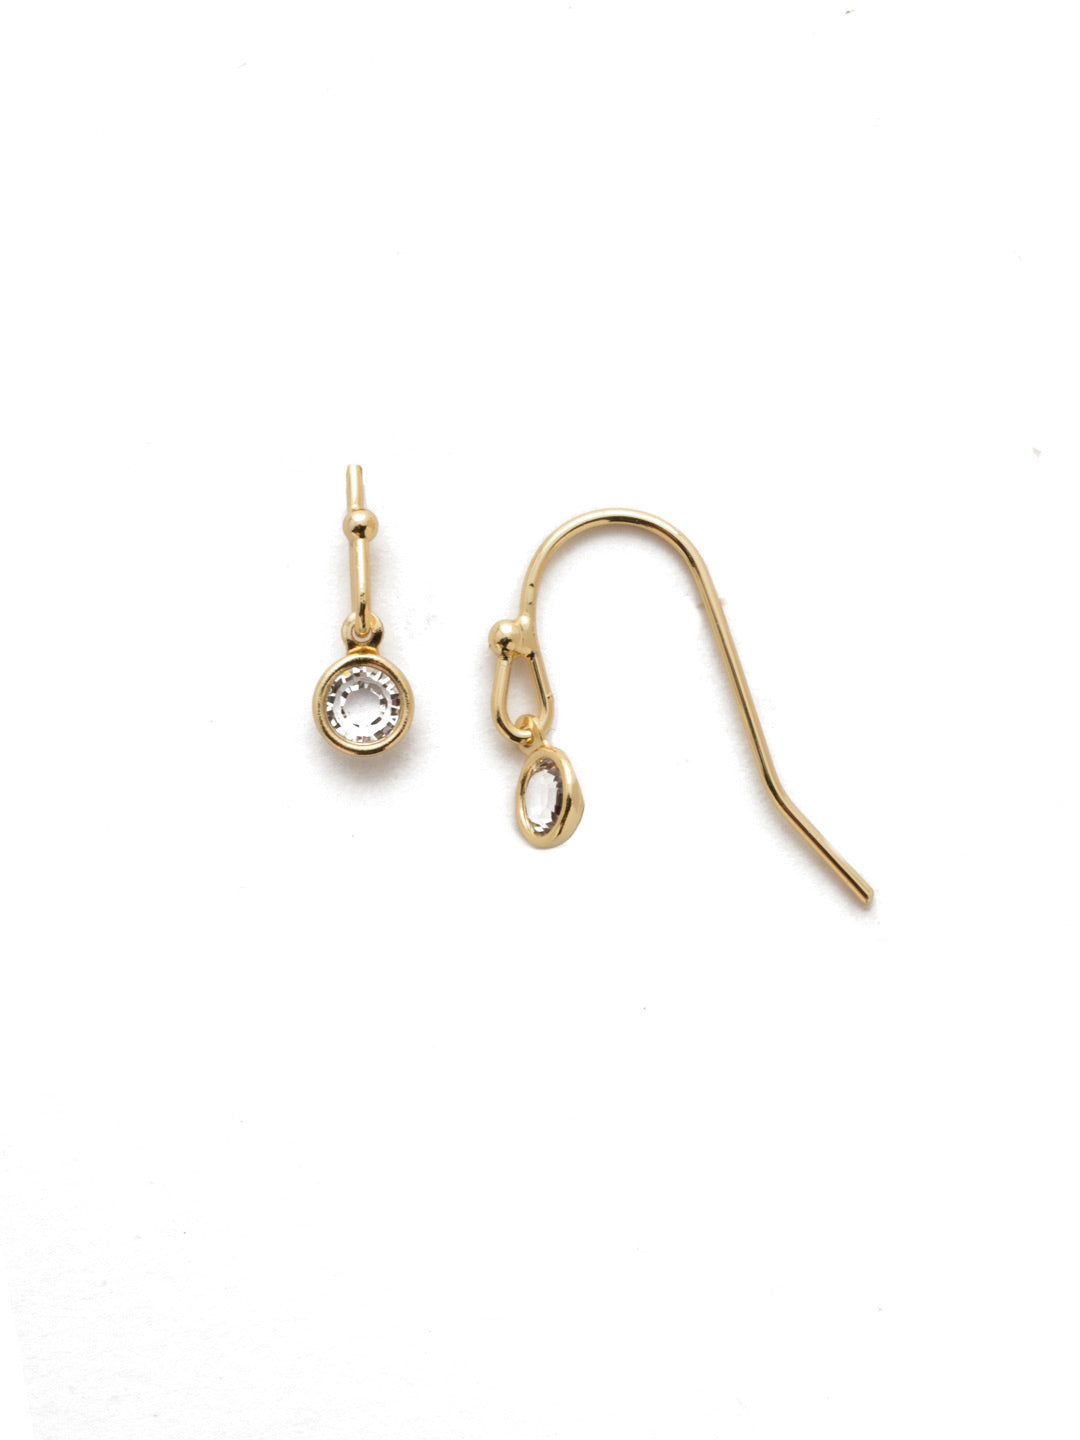 Rain Dangle Earrings - EEH3BGCRY - <p>A single beaded drop is all you need to up your style factor with this classic pair. From Sorrelli's Crystal collection in our Bright Gold-tone finish.</p>